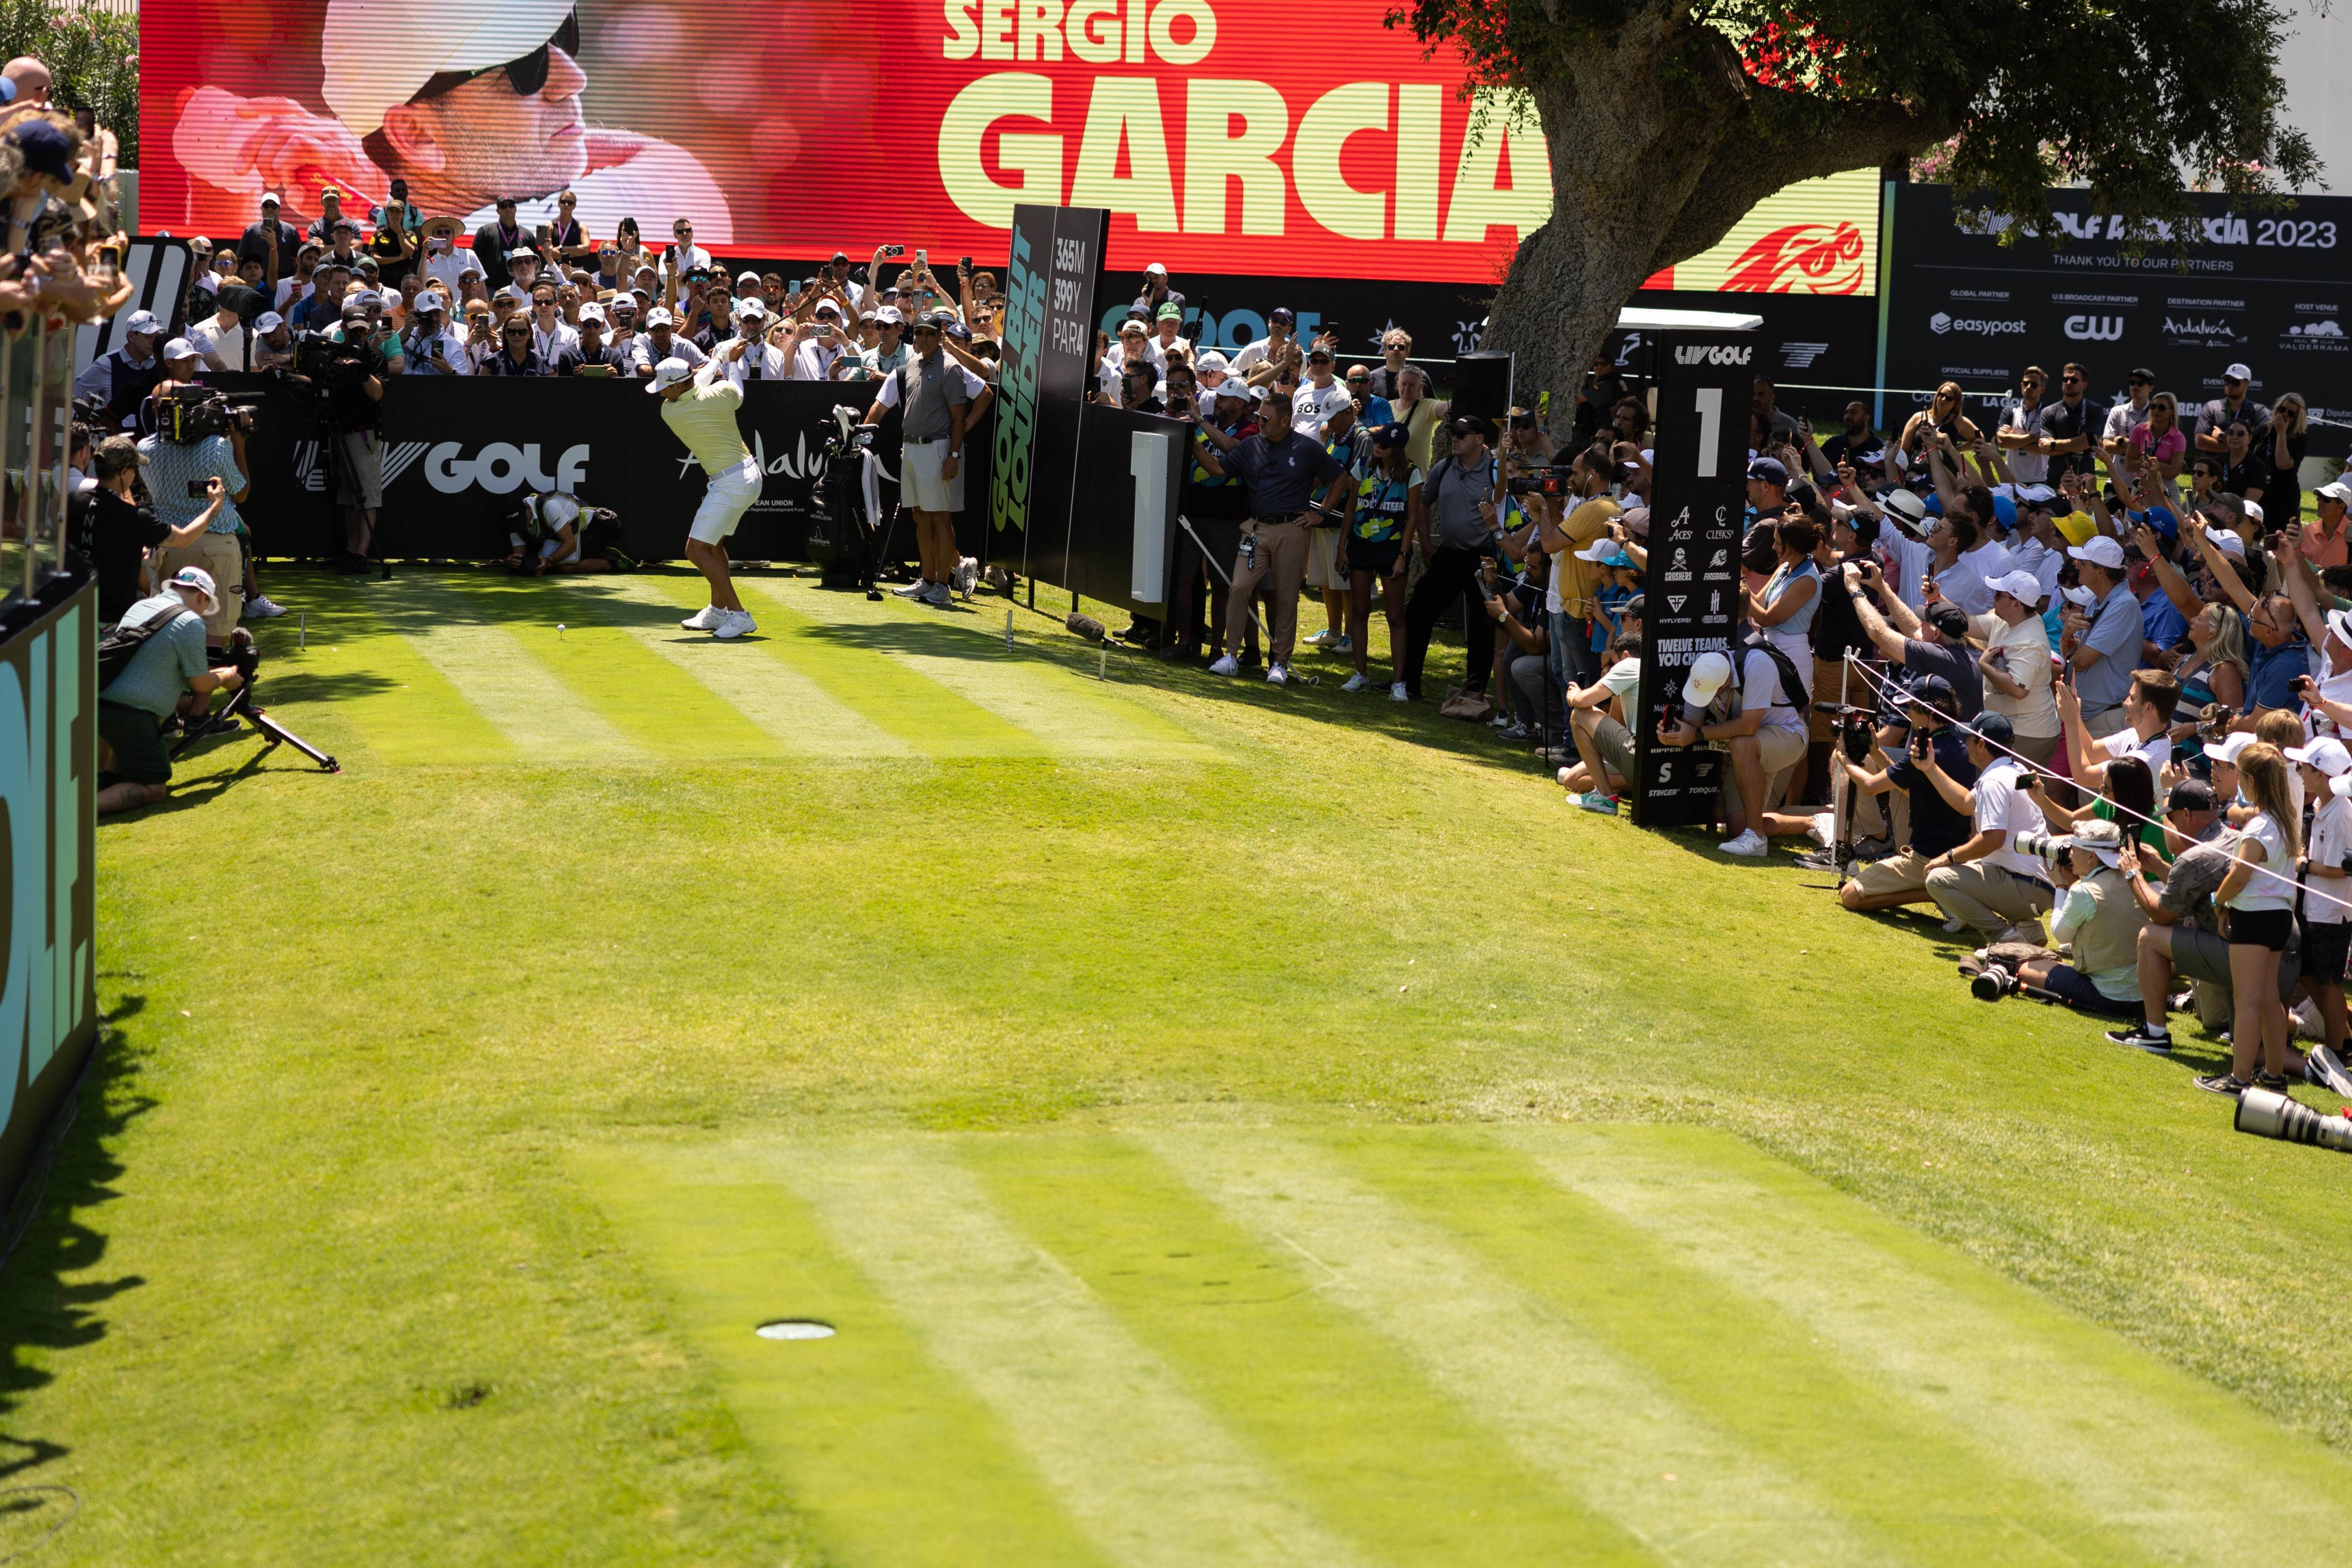 Sergio Garcia tees off during the first round of LIV Golf Andalucía. Photo: LIV Golf